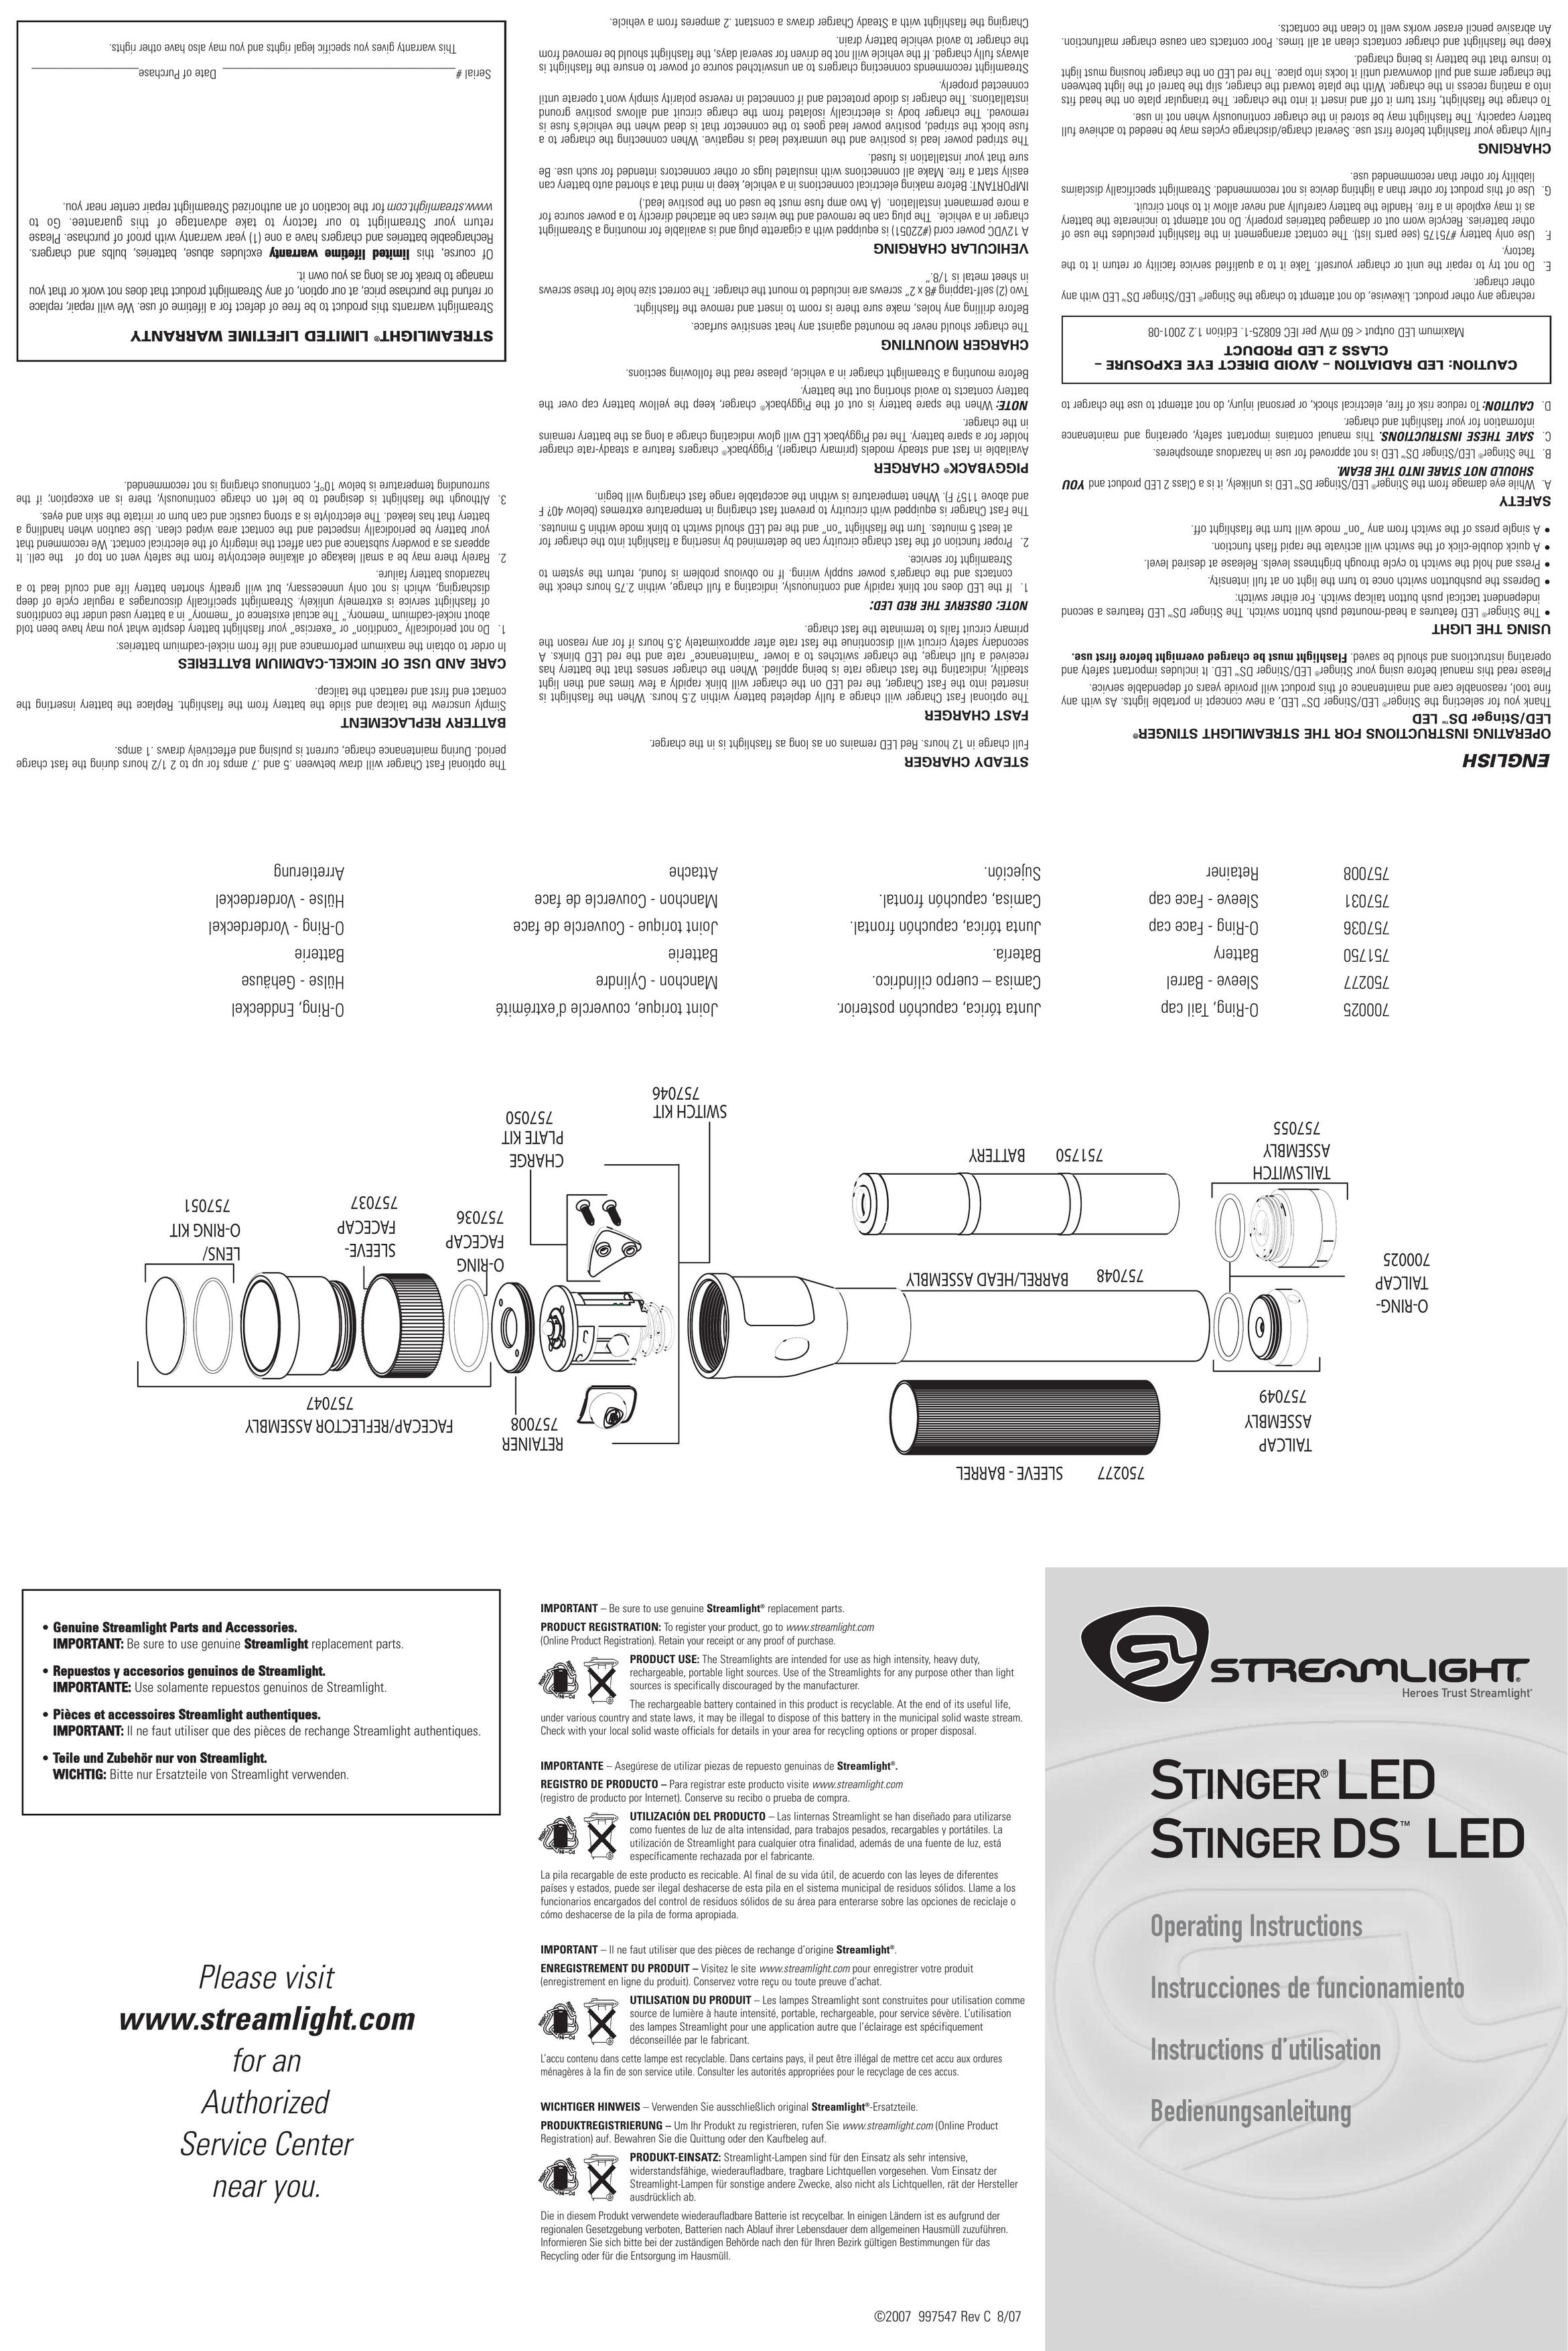 StreamLight 757050 Home Safety Product User Manual